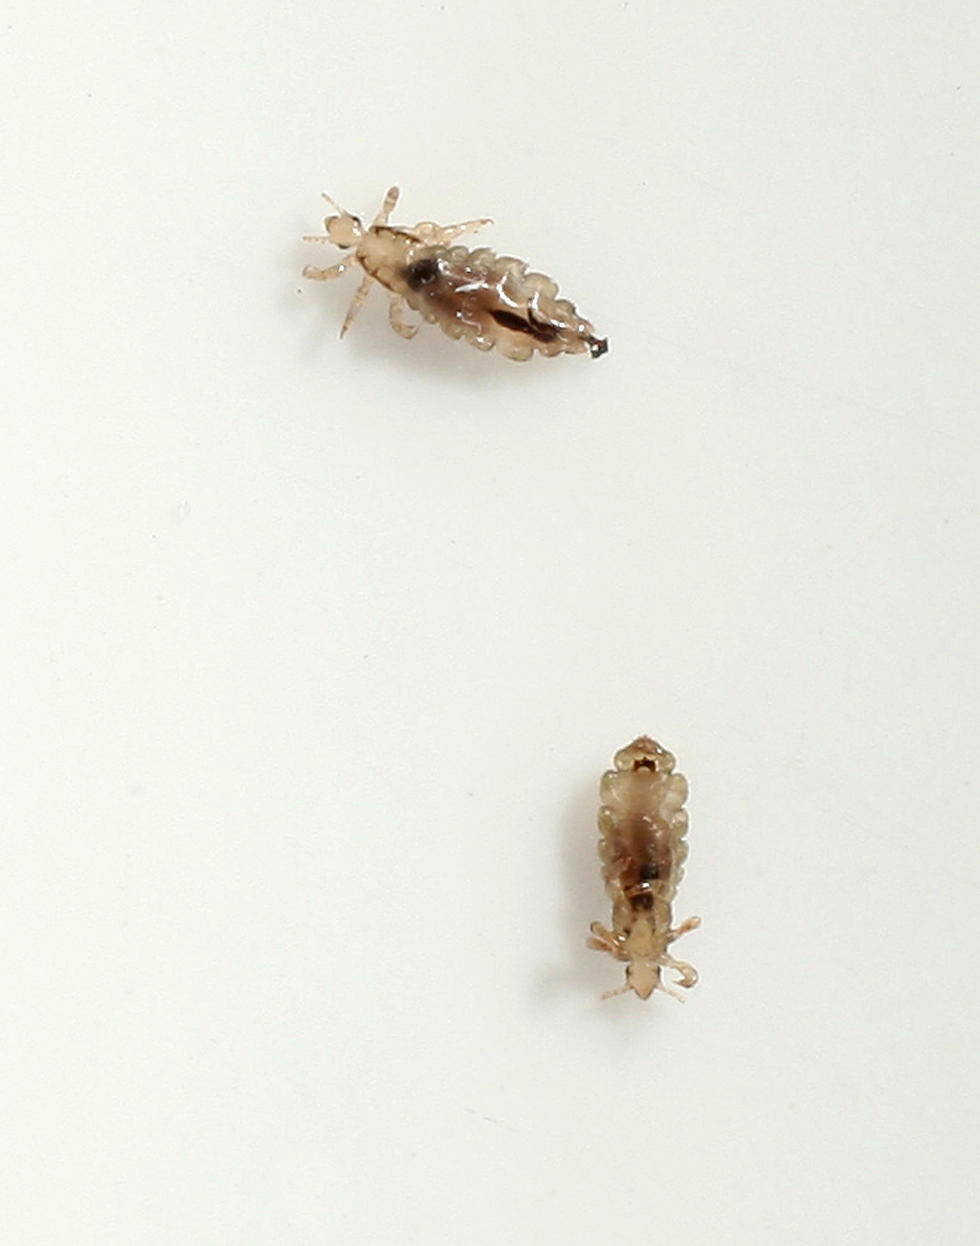 An Absolutely Disgusting Head Lice Infestation [Video]